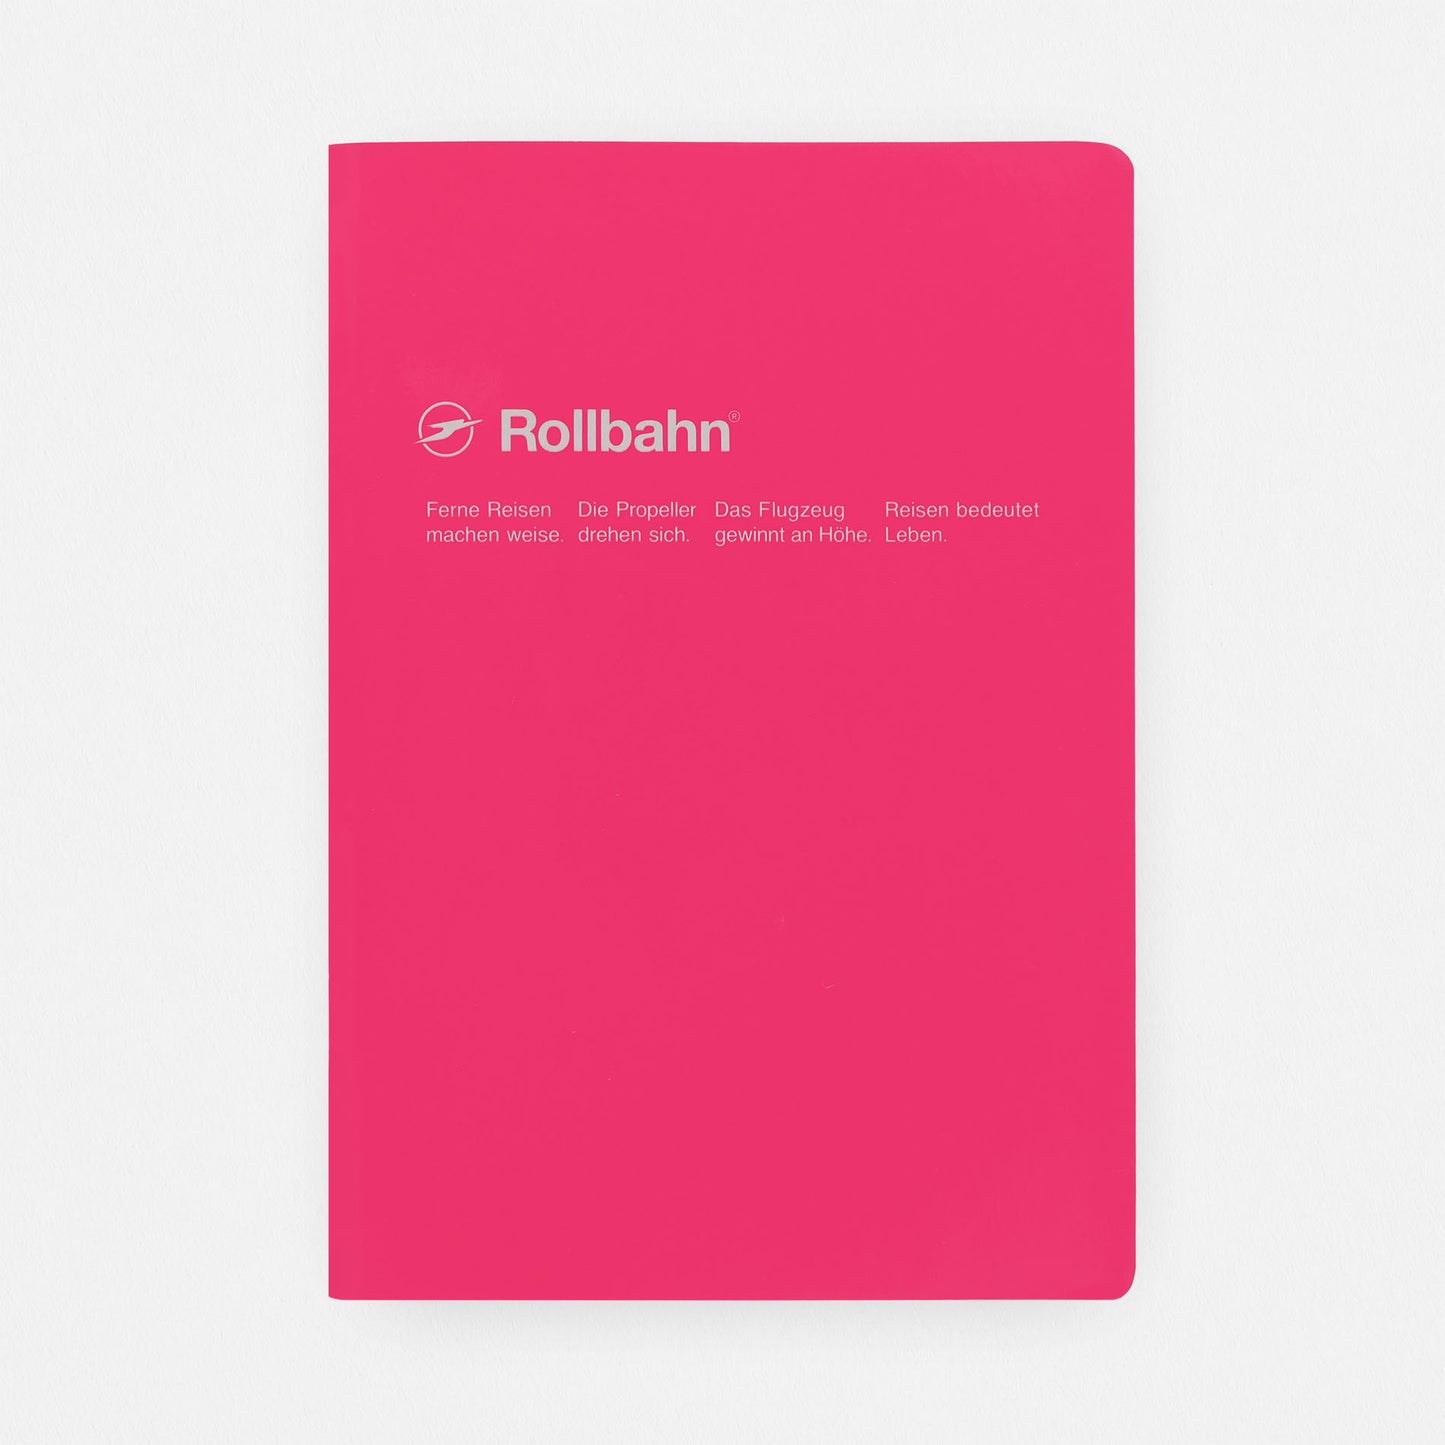 Delfonics Rollbahn "Note" Notebook Pocket, Large, A5 Or Extra Large  | 10 Colors Rose / Pocket A6 ( 4 x 6")